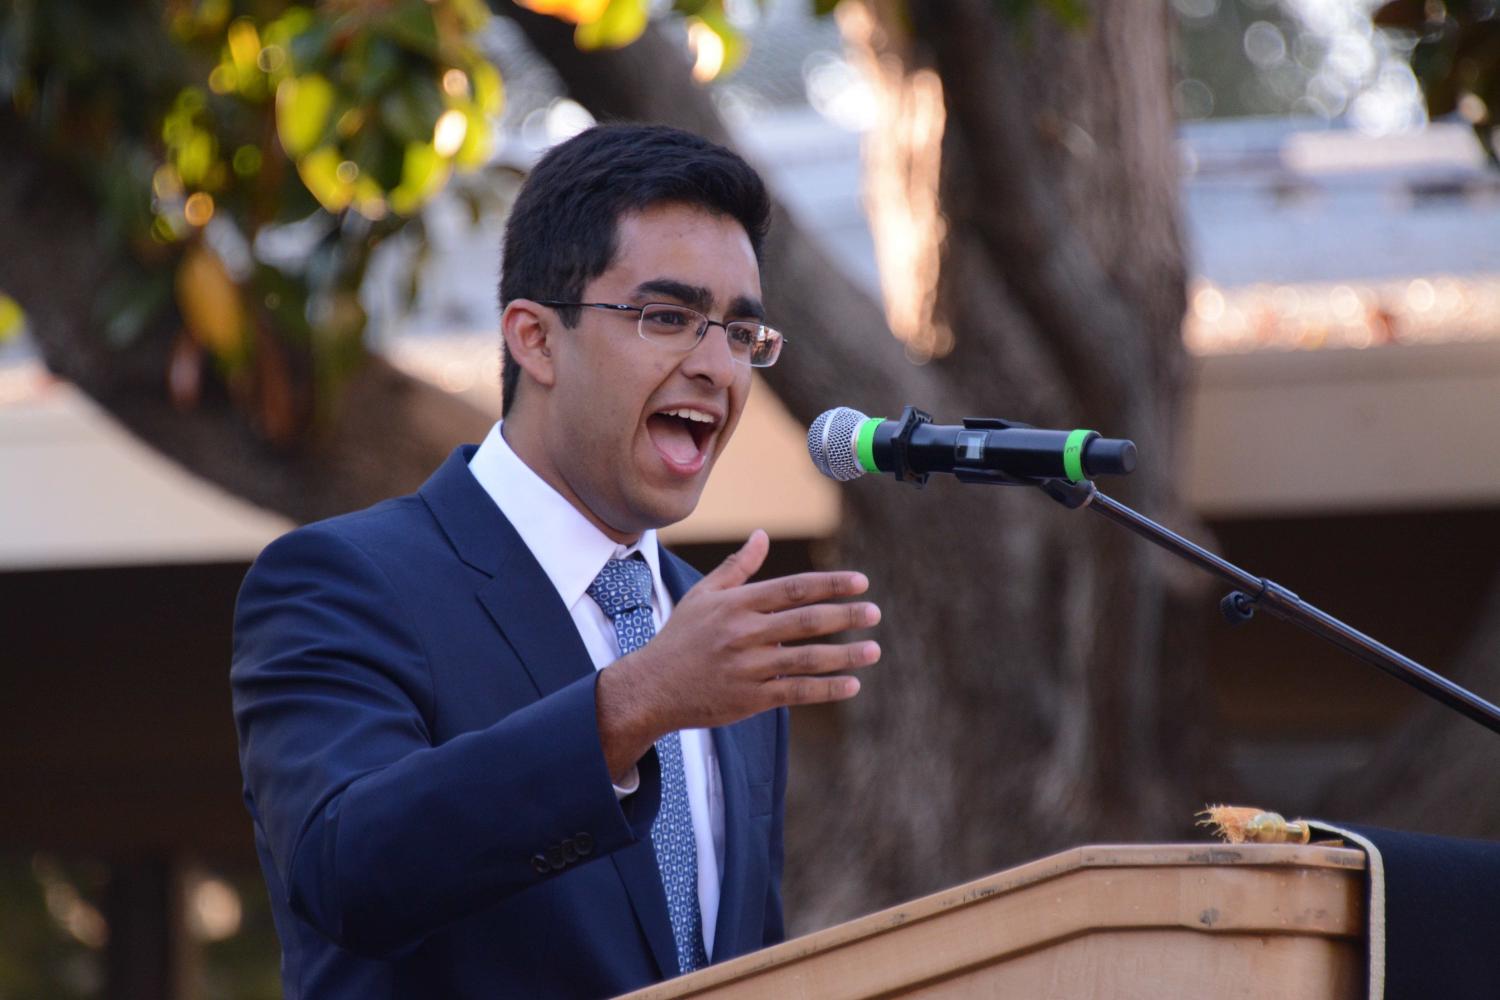 Baccalaureate student speaker Aditya Dhar (12) makes a joke during his speech. “As we go further and further down our own paths, our options start to narrow. We have to solidify what we want to study, We have to solidify what our plans are after graduation, what is we want to do in life, but the only way that you can set out on your own path is if you take all the opportunities, he said.